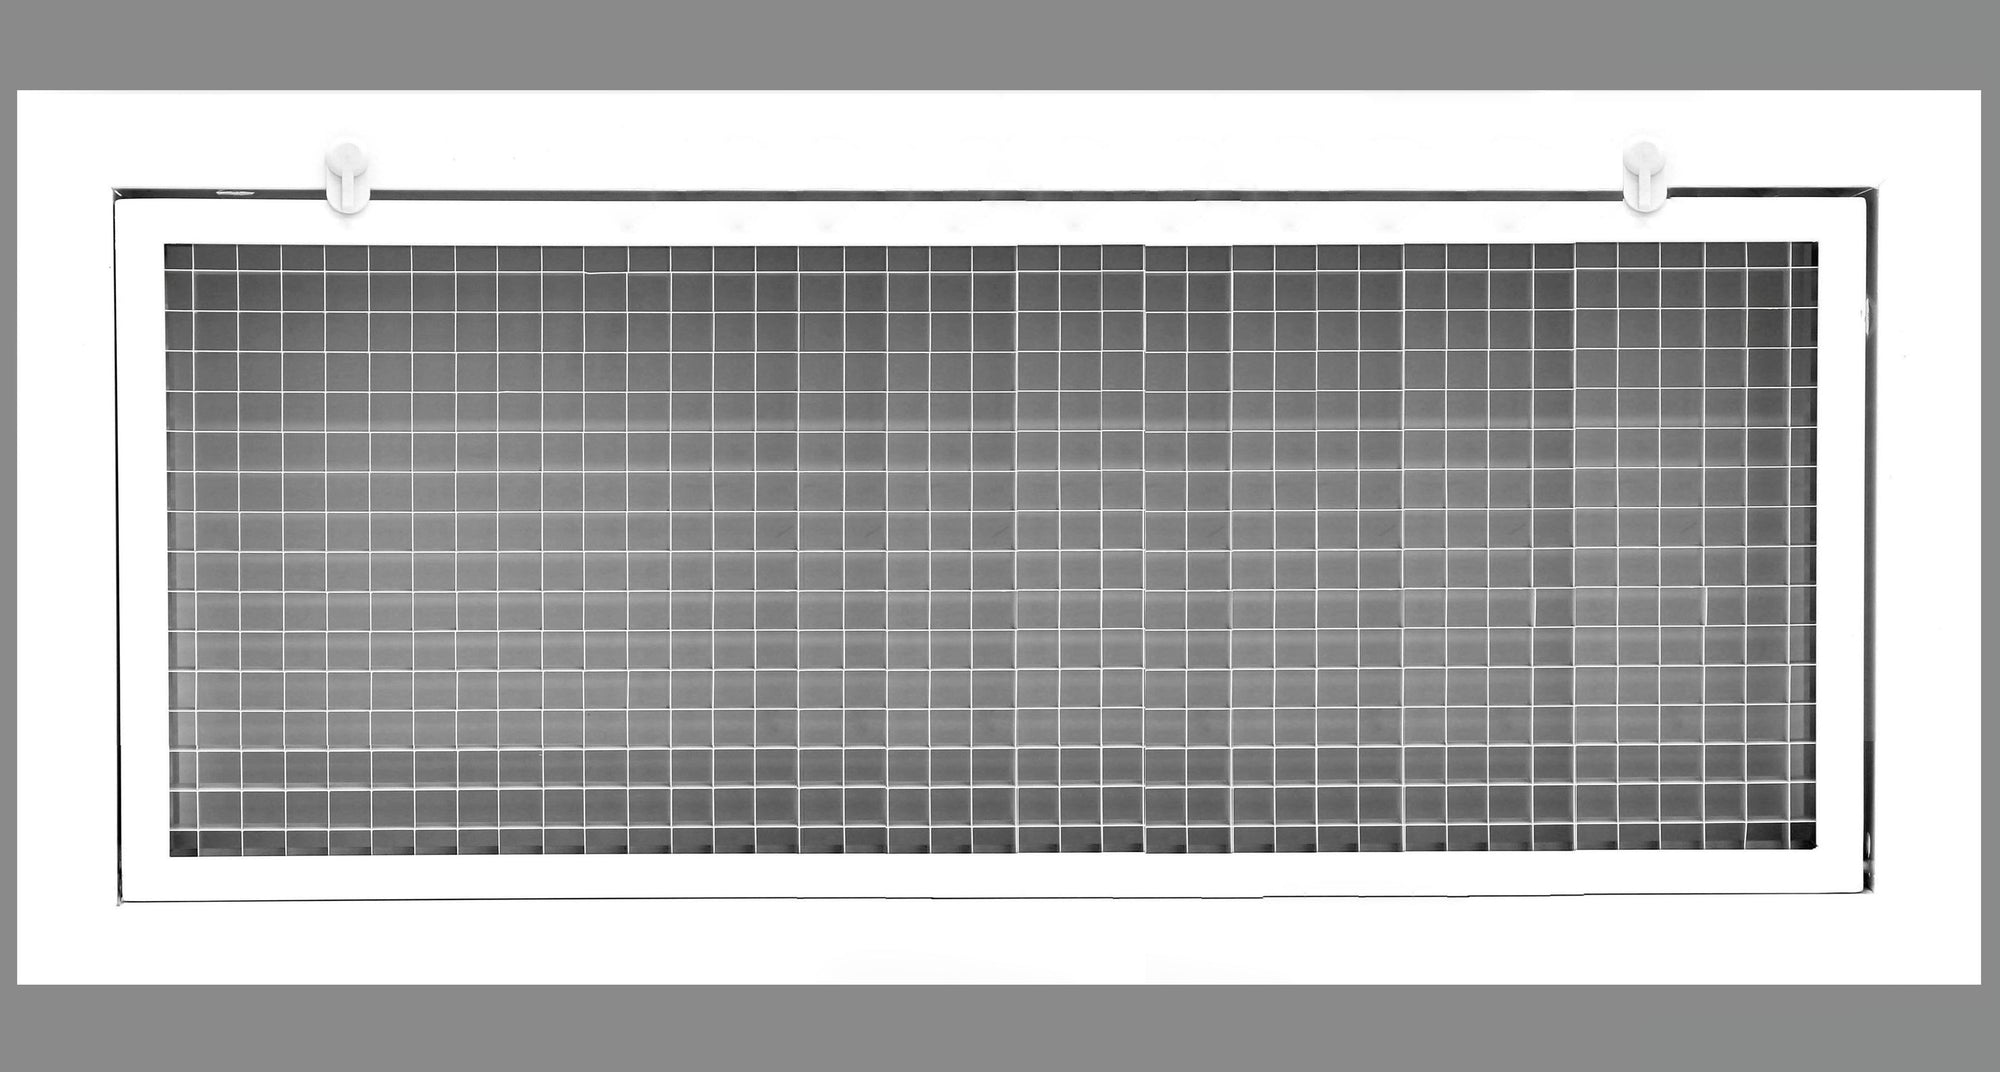 32" x 12" Cube Core Eggcrate Return Air Filter Grille for 1" Filter